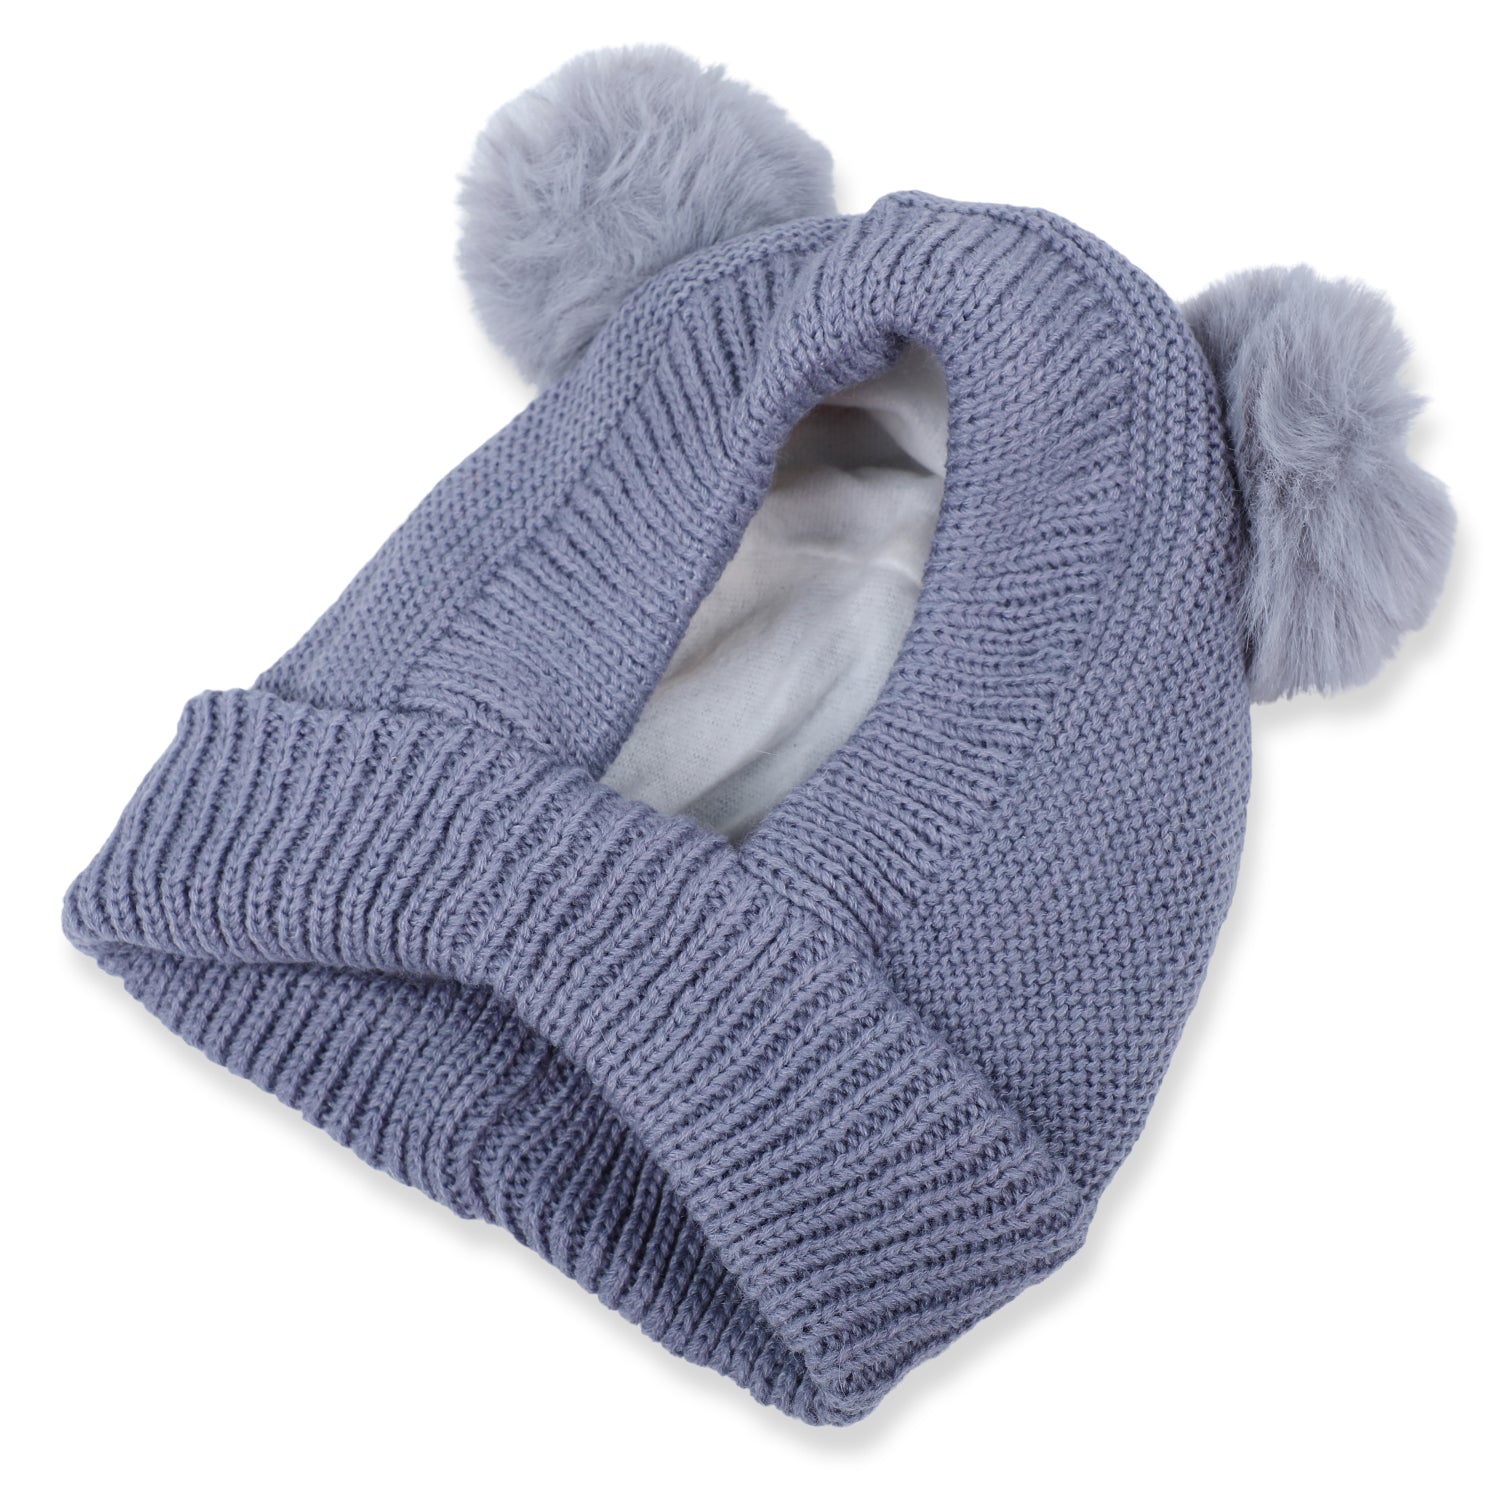 Baby Moo Adorable Pom Pom Knitted Beanie Woollen Cap - Grey - Baby Moo